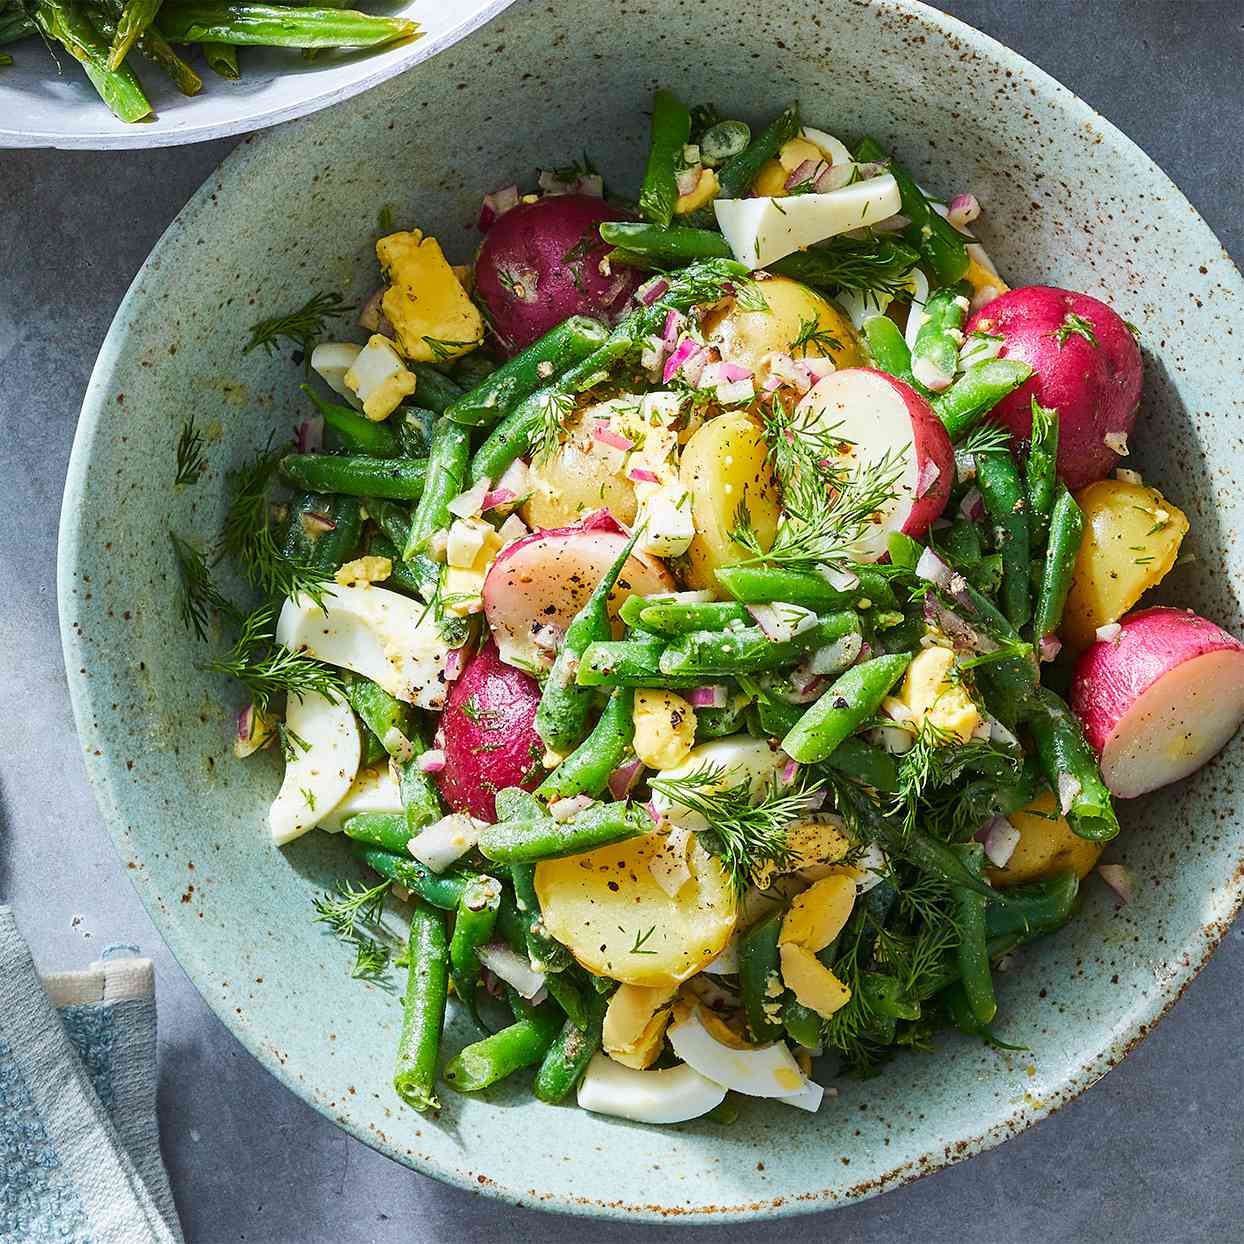 Dilly Potato Salad with Green Beans